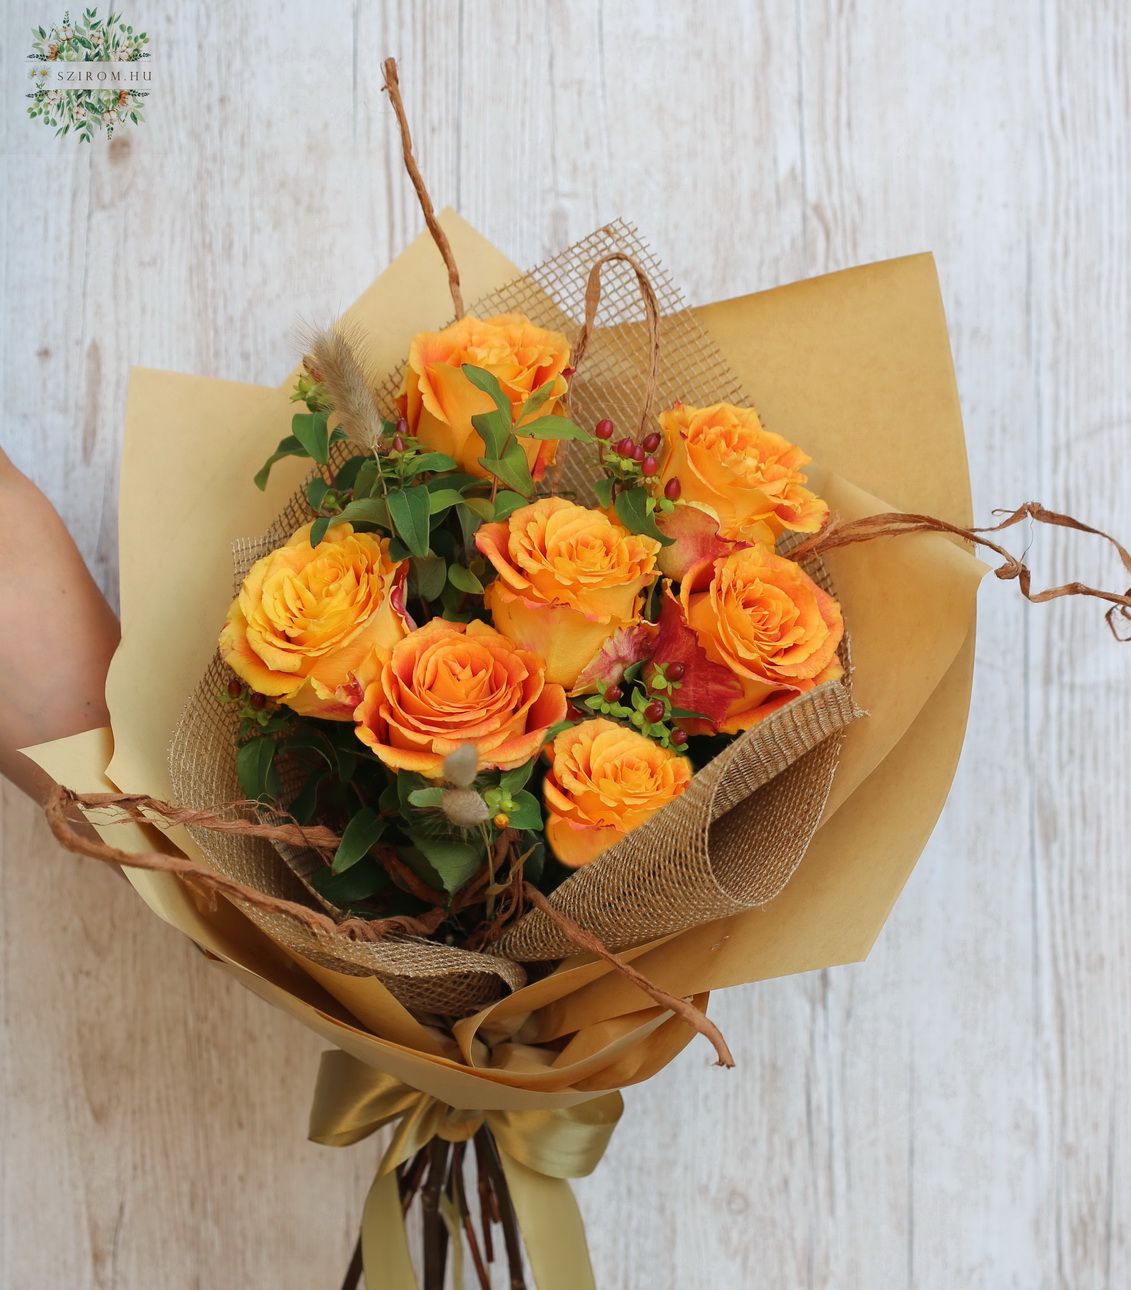 flower delivery Budapest - 7 orange roses, with hypericum berries, with rustic decoration